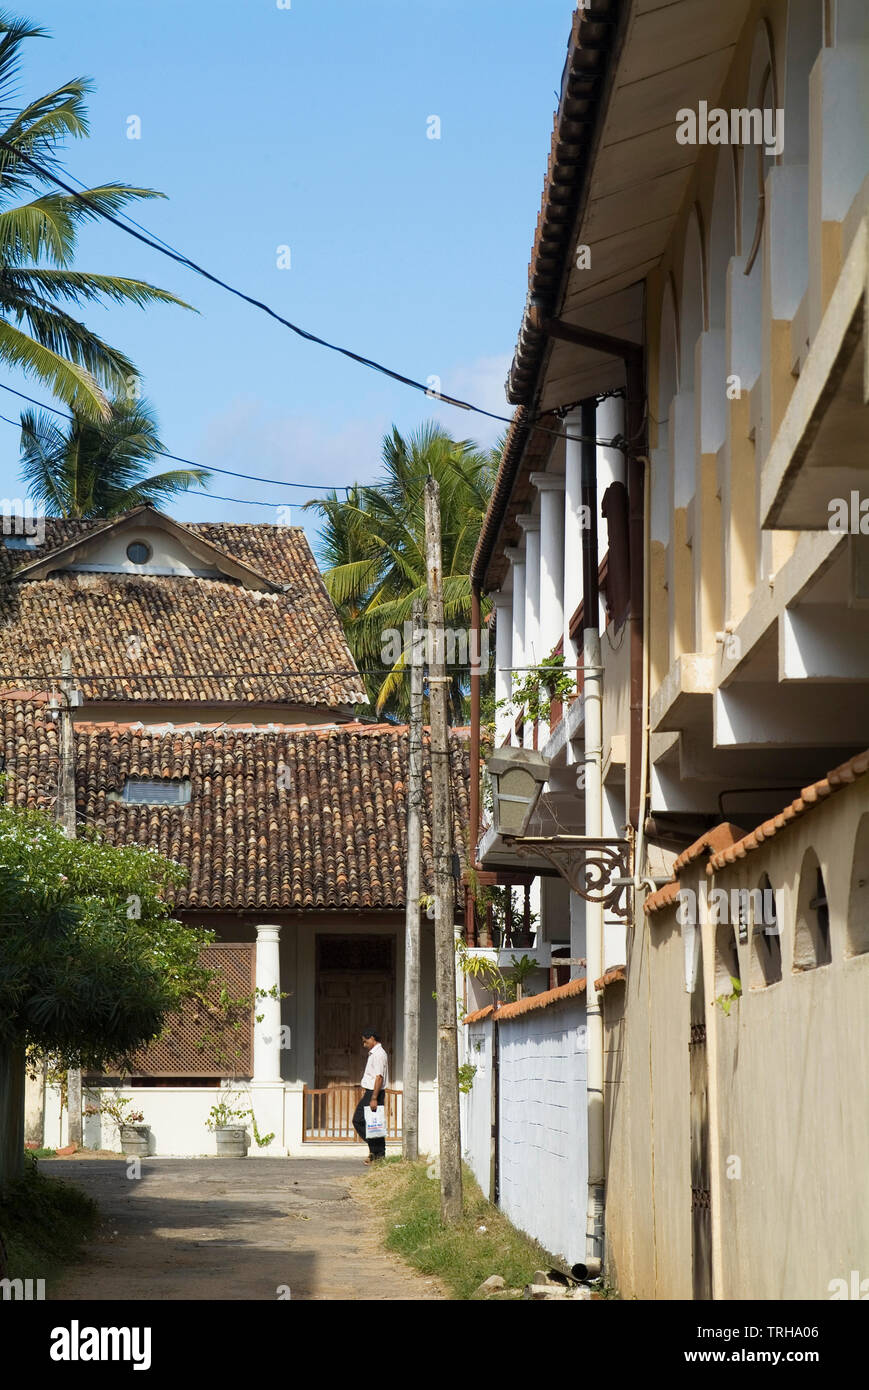 A street lined with Dutch built houses in the historical fortress of Galle, Sri Lanka. Galle was colonised by the Portuguese in 1588. The Galle fort i Stock Photo